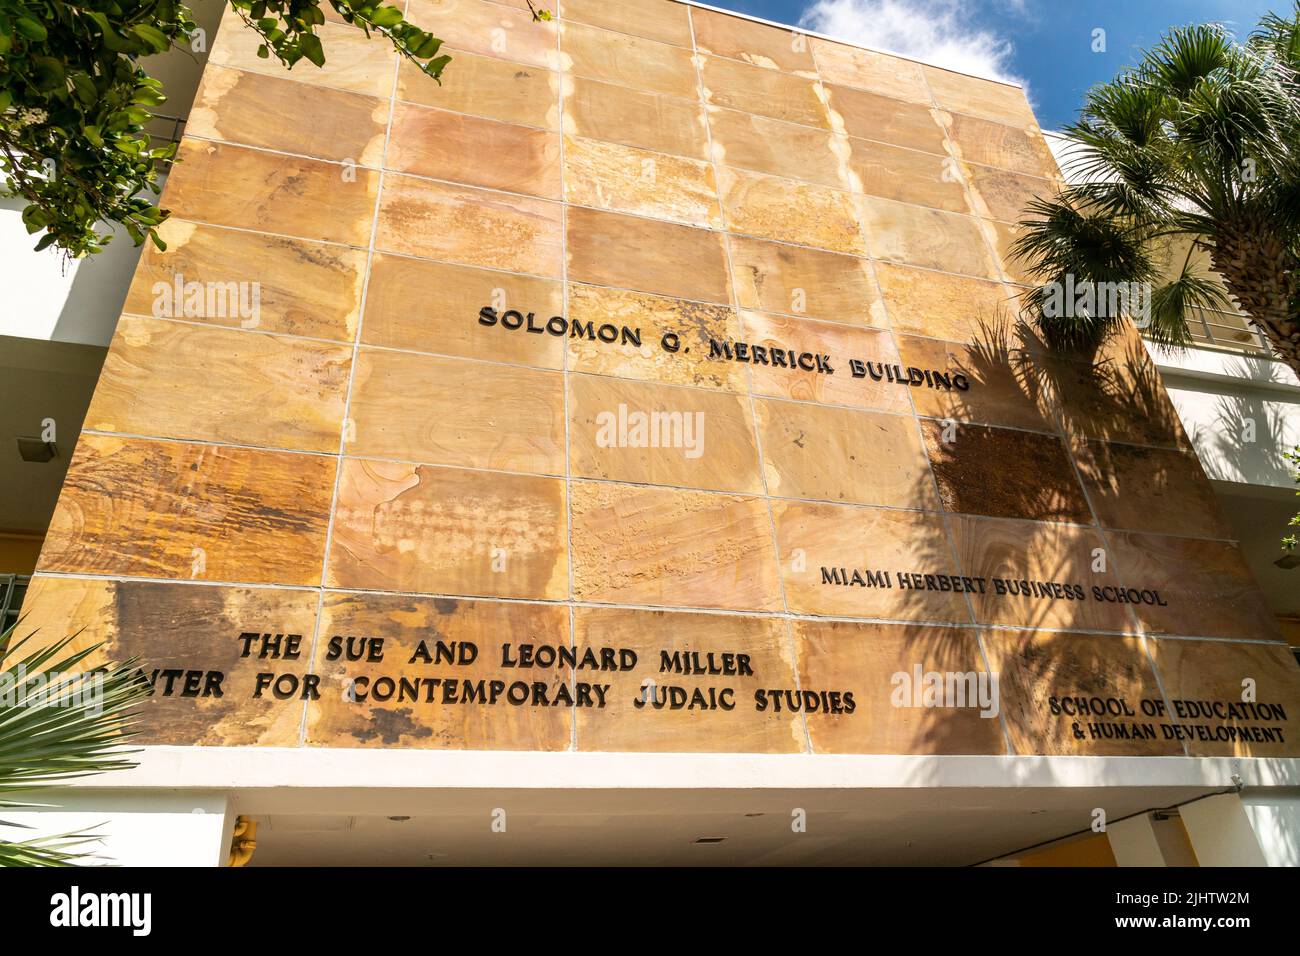 CORAL GABLES, FL, USA - JULY 2, 2022: Solomon O. Merrick Building on the campus of the University of Miami. Stock Photo